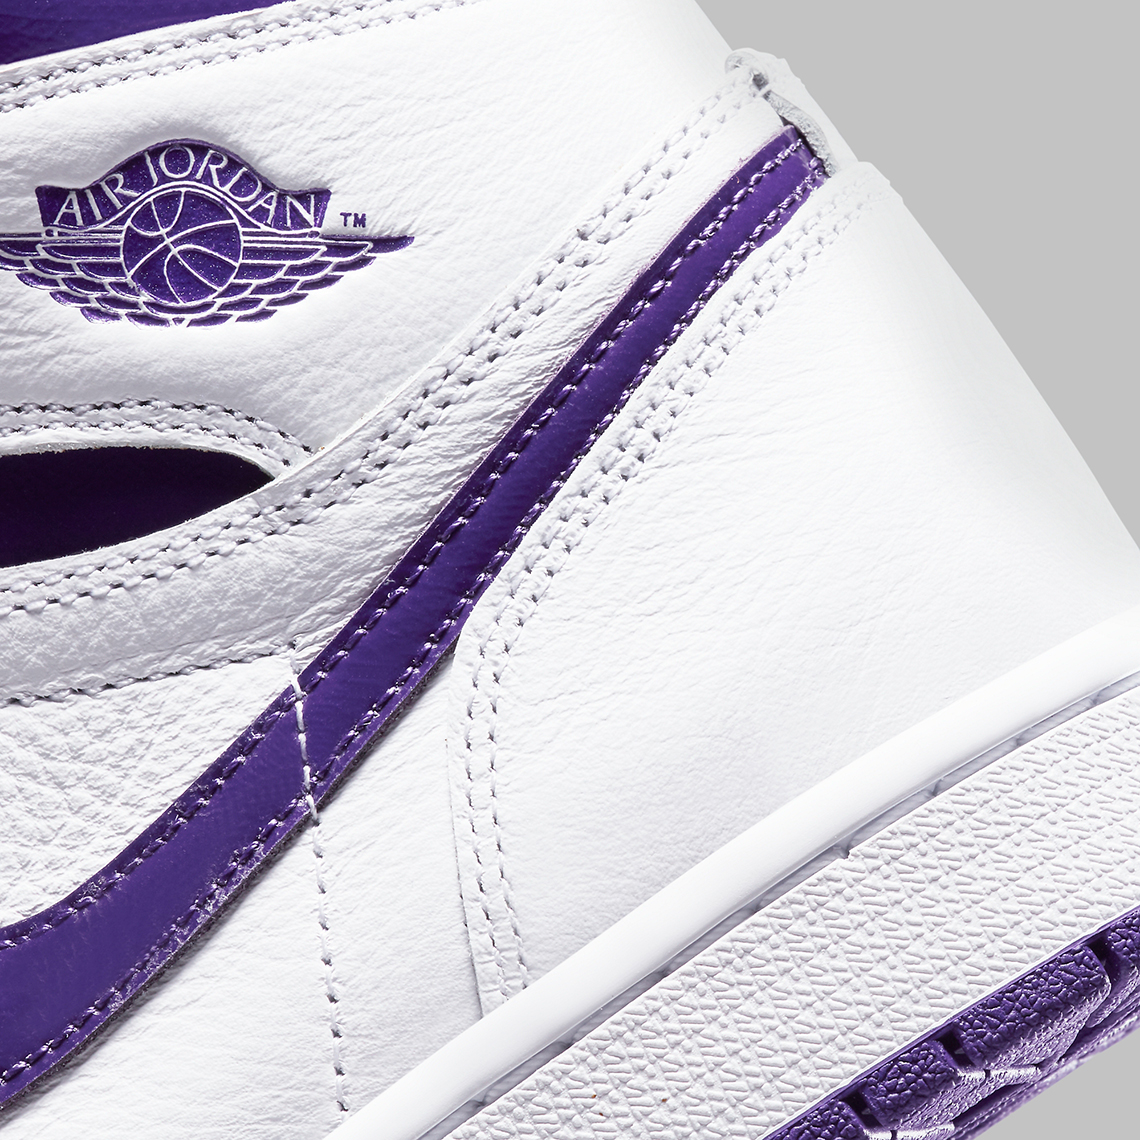 Synthetic leather strap with Jordan branding Retro High Og Wmns White Court Purple Cd0461 151 4